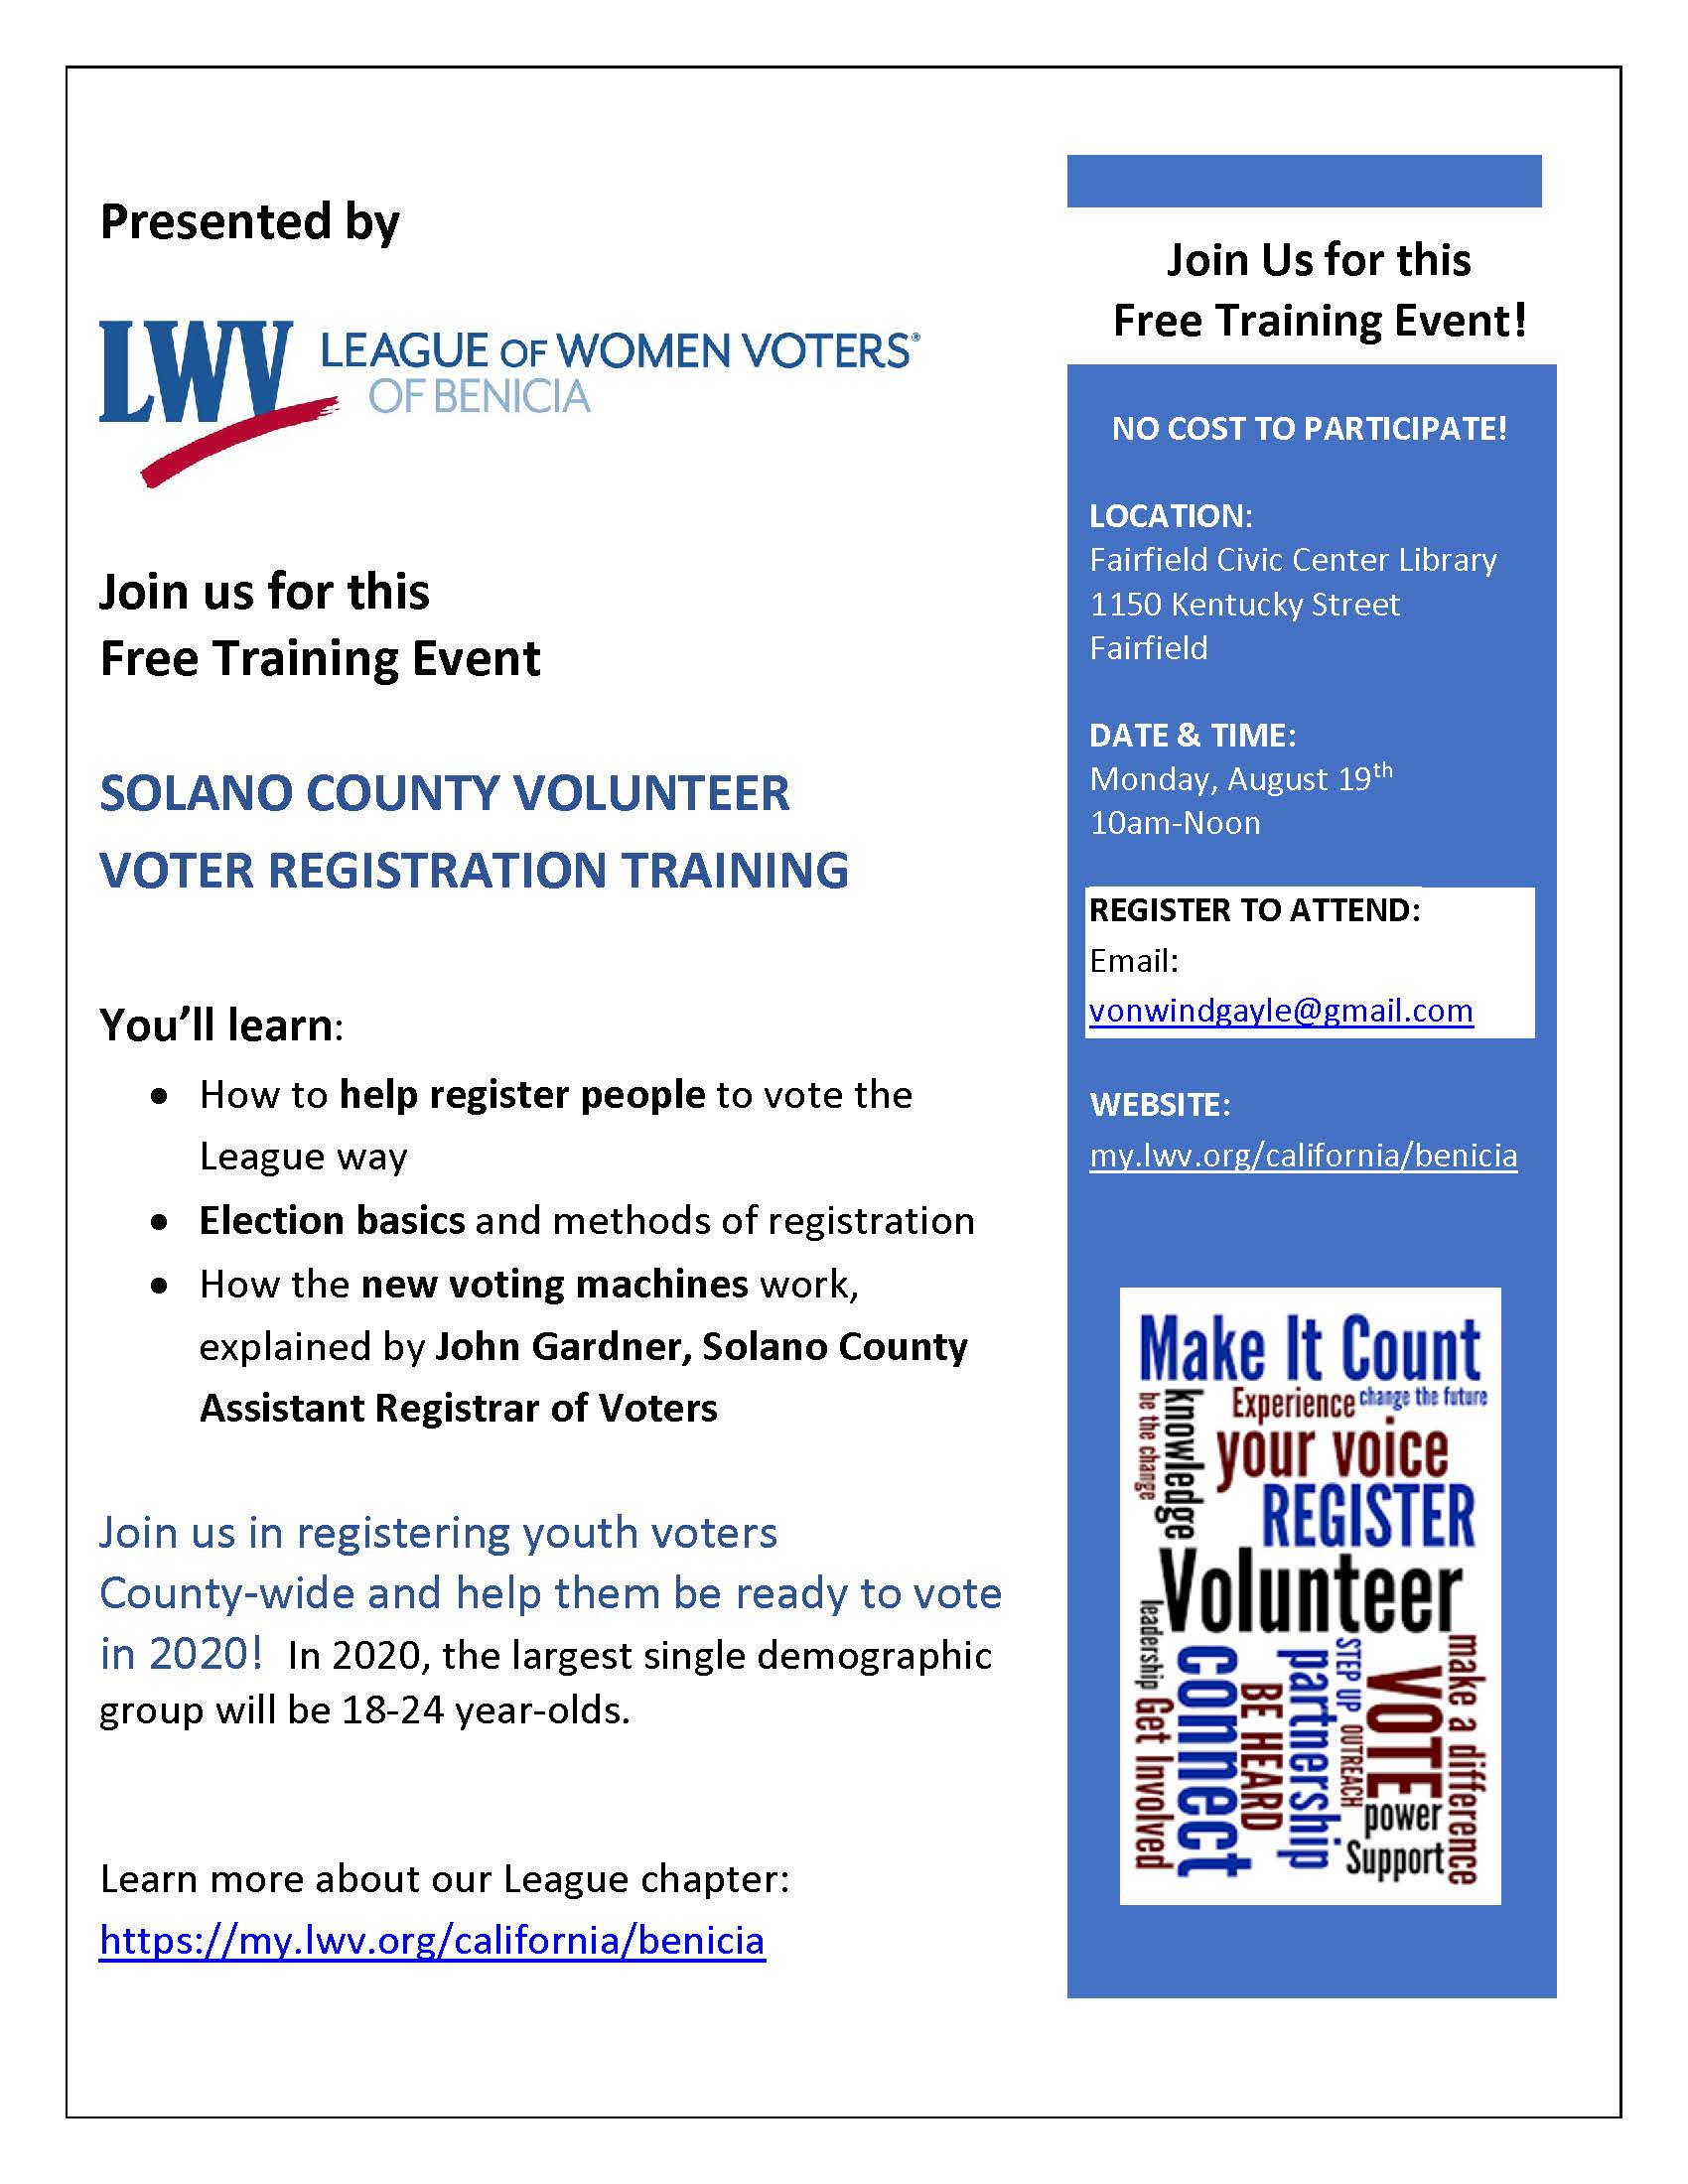 Solano County Voter REgistration Training August 19 2019